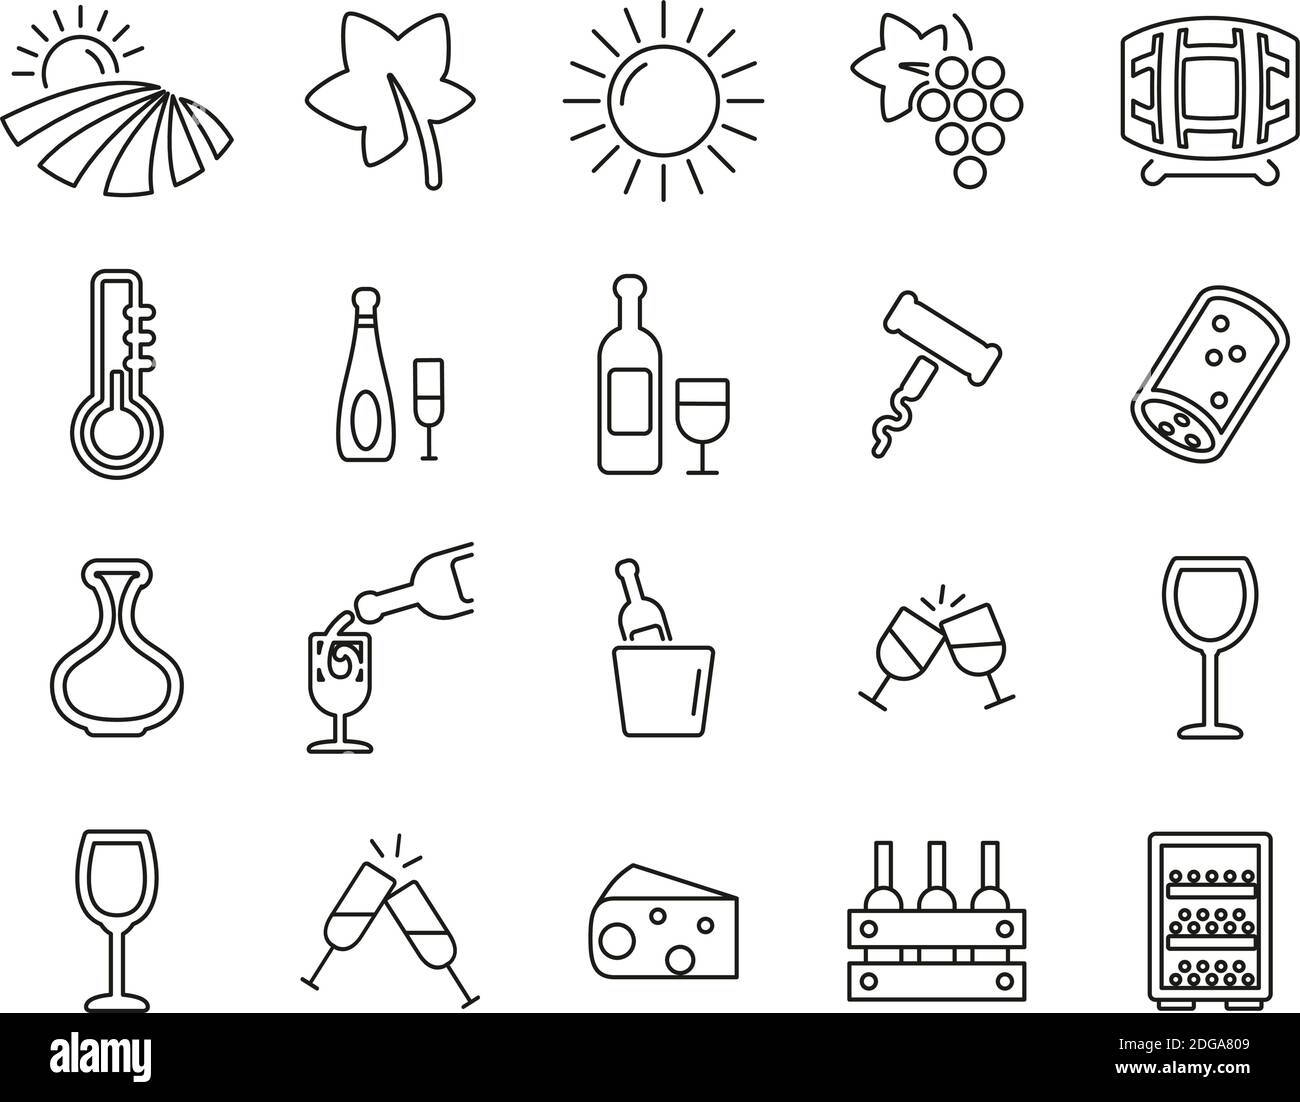 Wine Or Winery Icons Black & White Thin Line Set Big Stock Vector